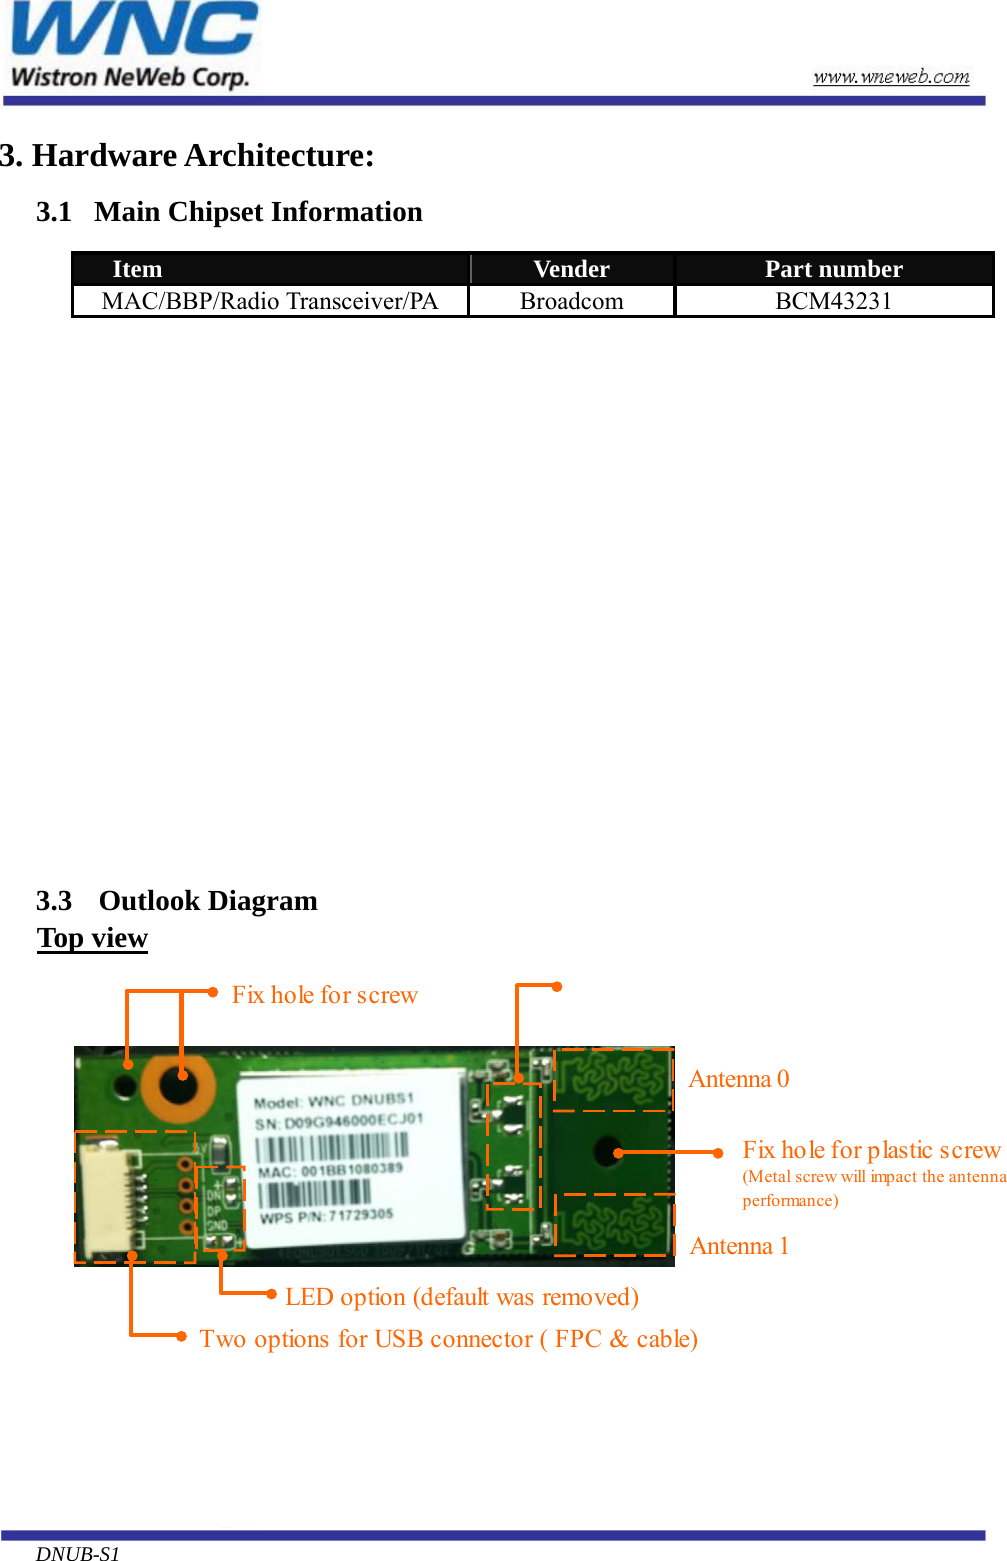  3. Hardware Architecture: 3.1   Main Chipset Information Item  Vender  Part number MAC/BBP/Radio Transceiver/PA  Broadcom  BCM43231  3.2  Circuit Block Diagram The major internal components and external interfaces of DNUB-S1 are illustrated in Figure 1-1. JTAGUSB2.0GPIOInternal BusARM ROMRAMDraft 802.11nMACSecurutySPROM I/FDraft-802.11nPHY2x2RadioBCM43231 Figure 1-1 DNUB-S1 Major Component and System Interface  3.3 Outlook Diagram Top view LED option (default was removed)Two options for USB connector ( FPC &amp; cable)Antenna 0Antenna 1Fix hole for plastic screw(Metal screw will impact the antennaperformance)Fix hole for screw    DNUB-S1       